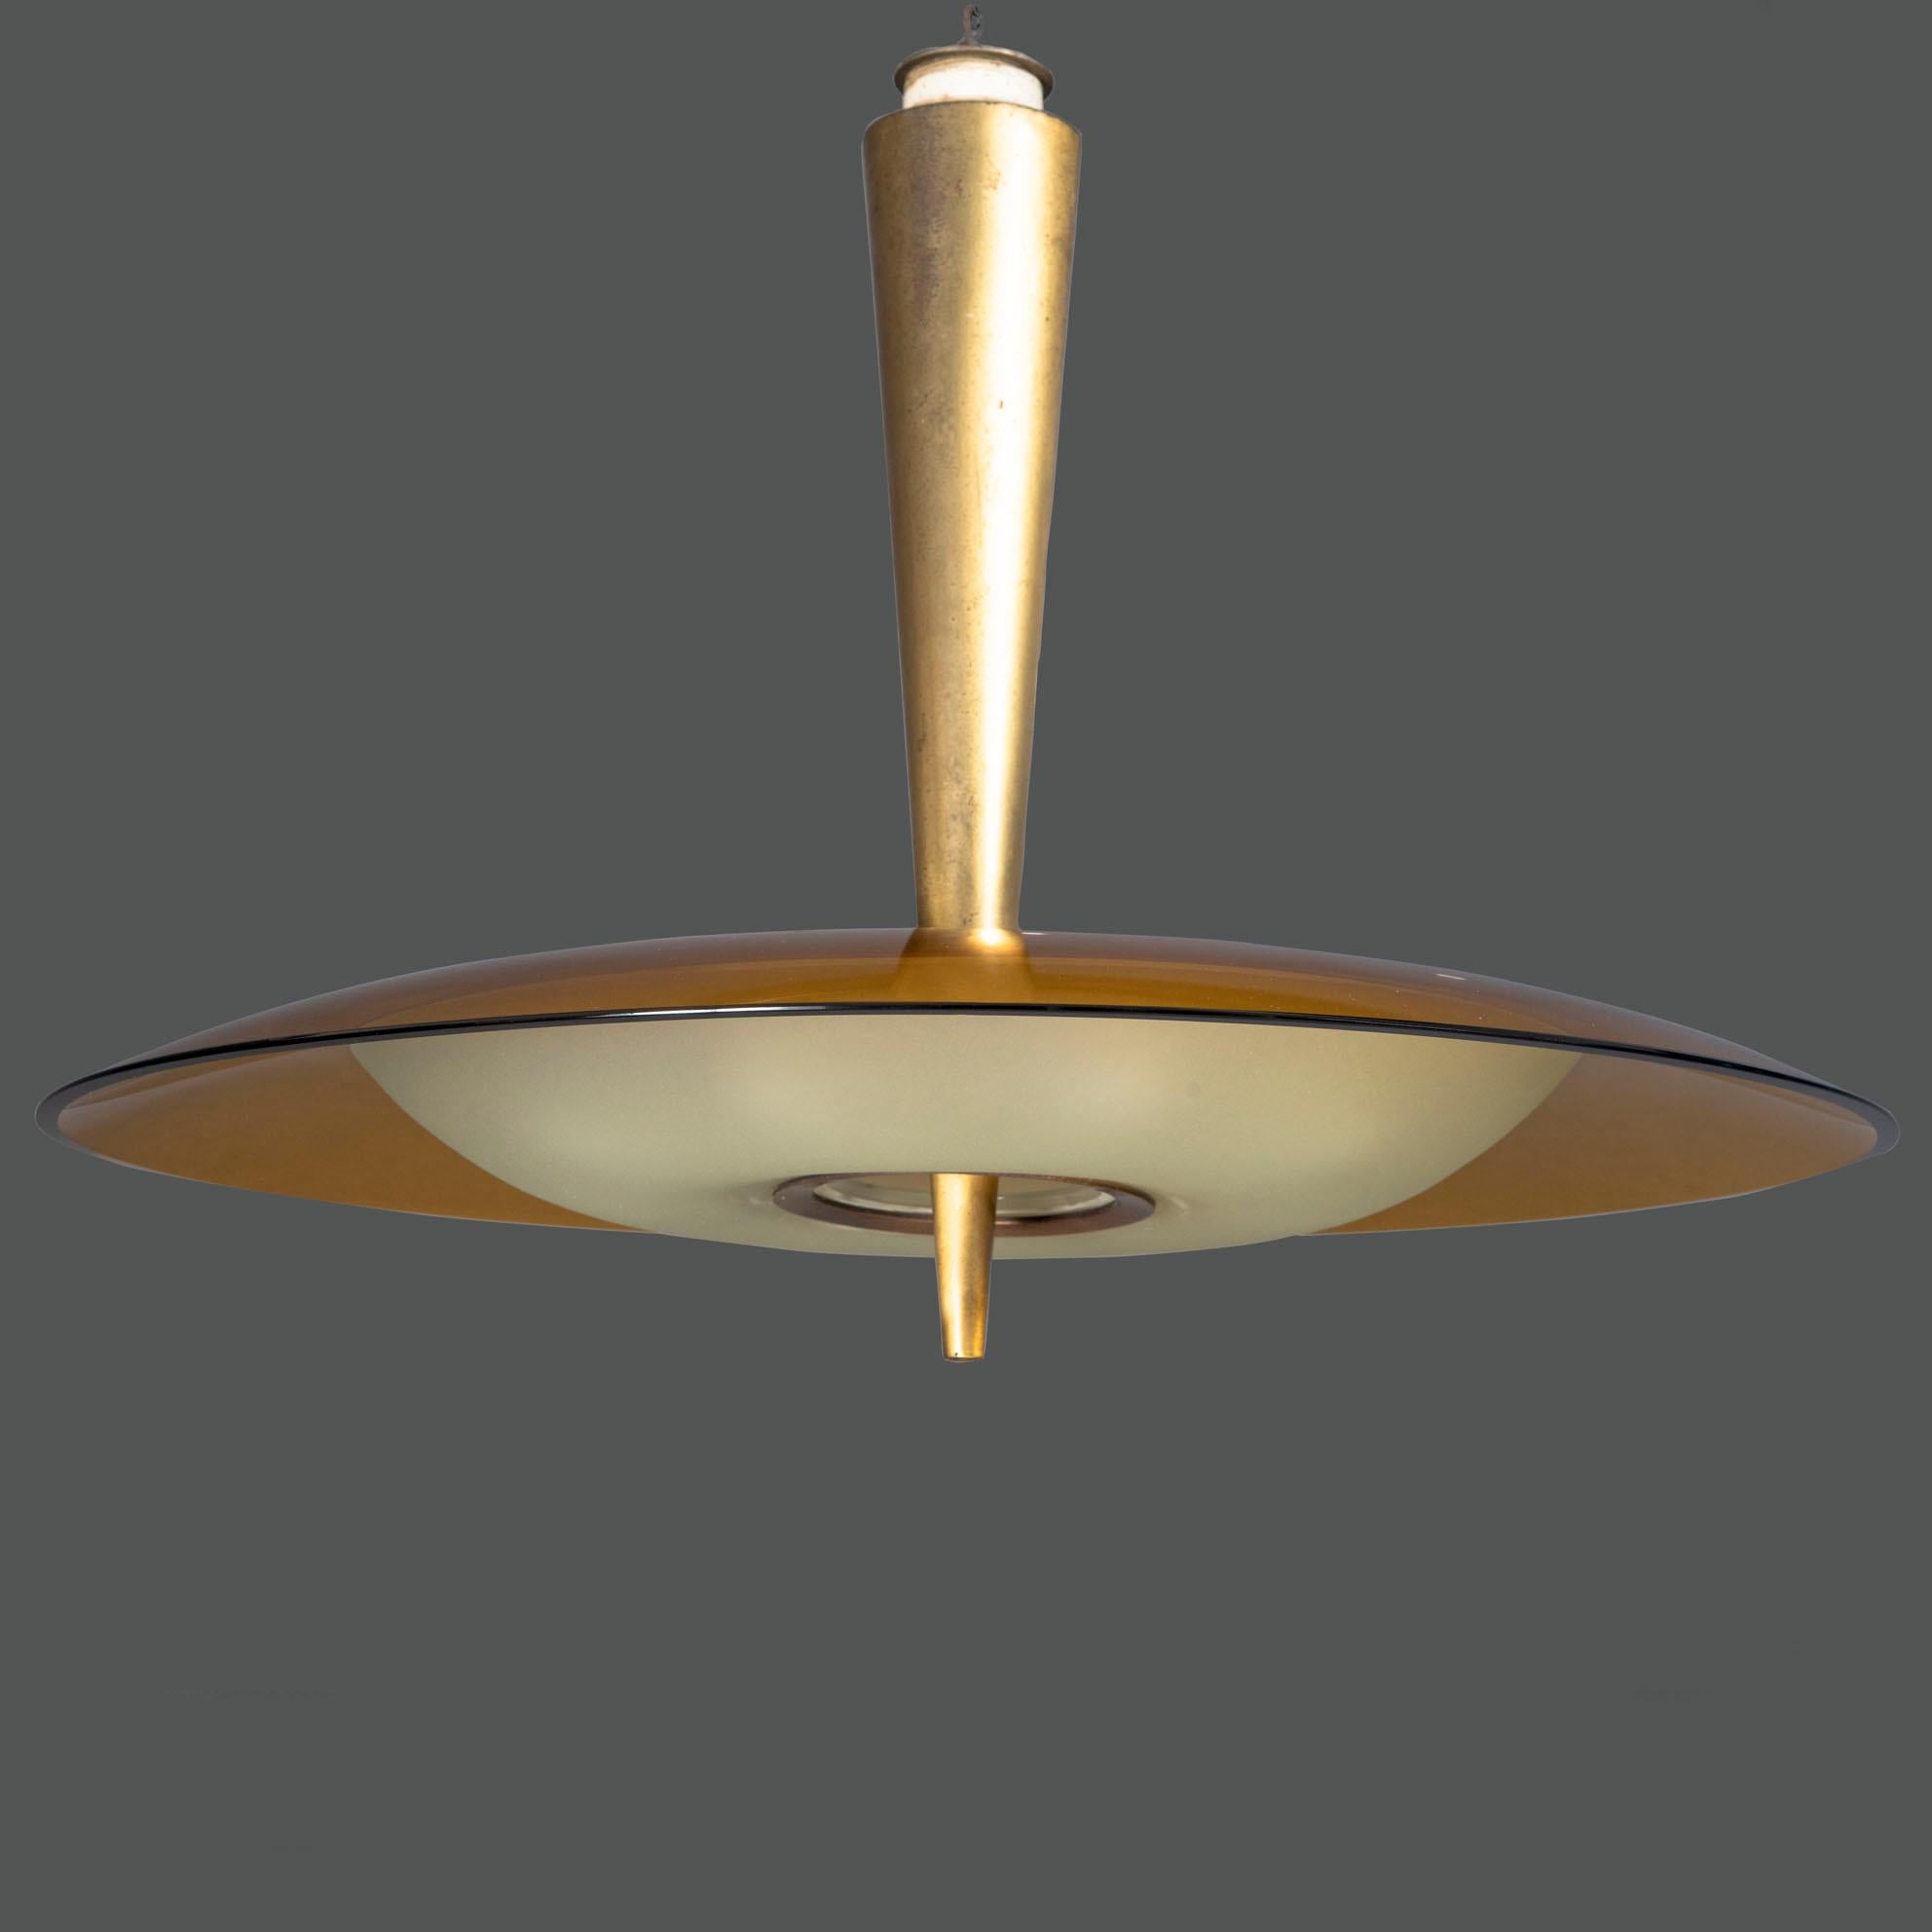 Iconic chandelier model 1462 A, made by Fontana Arte in the 1960s, designed by Max Ingrand. 
Very rare amber color
The eight candelabra sockets are masked by a frosted glass shade.
The hanging lamp is supported by a conical-shaped stem in gilded